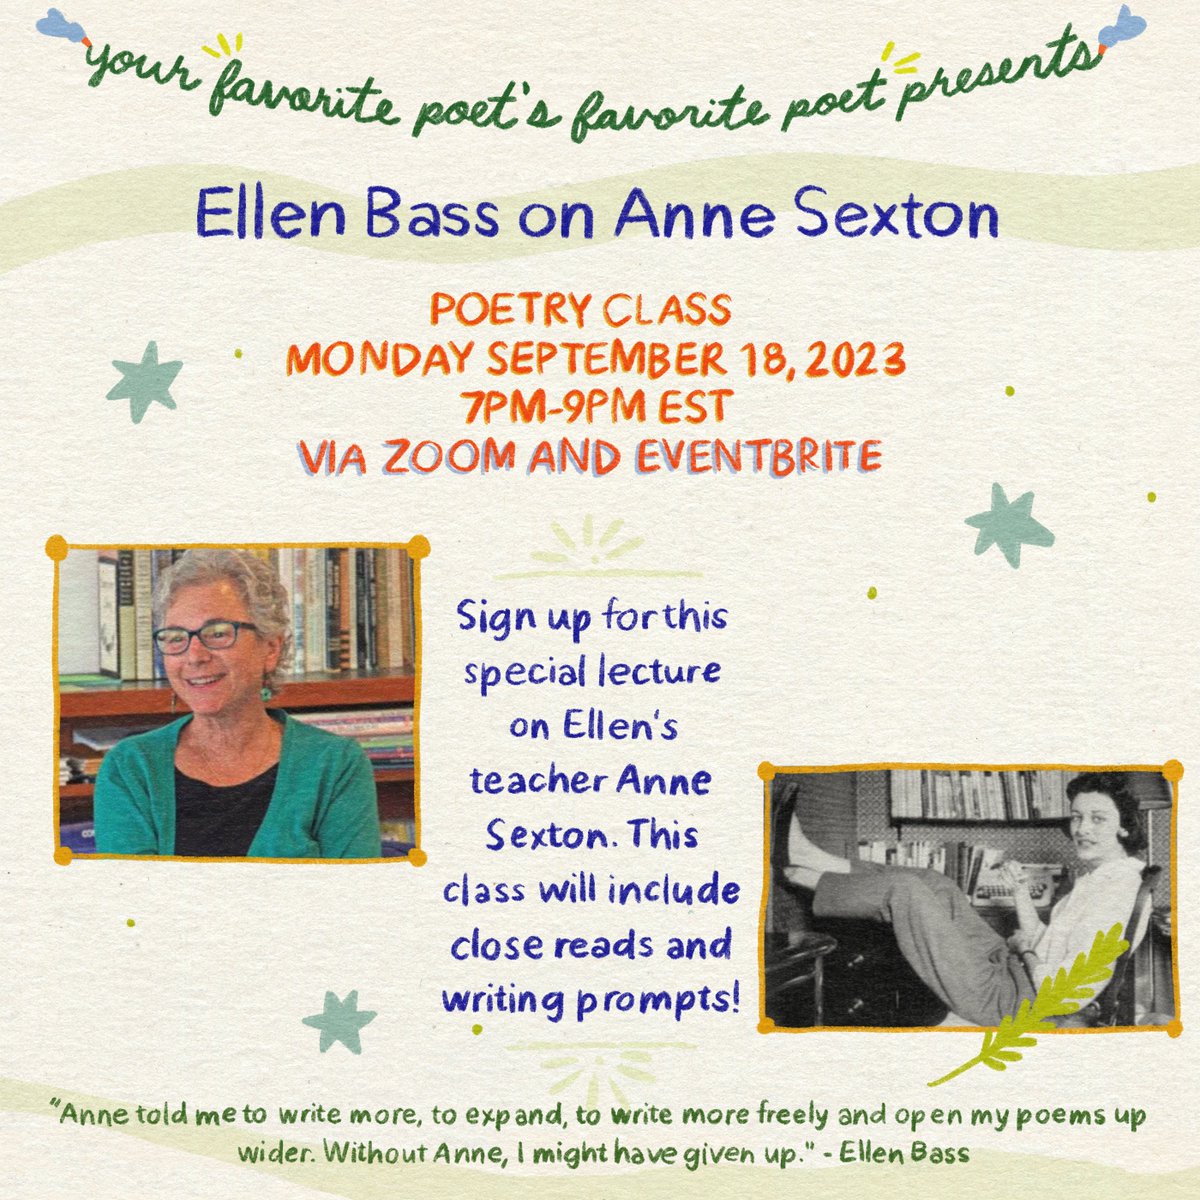 Tonight at 7 pm Eastern | 4 pm Pacific I will be talking about my teacher, Anne Sexton, in a poetry class hosted by Emily Sernaker. There is still time to register at: rb.gy/cx6g5 #poetrylovers